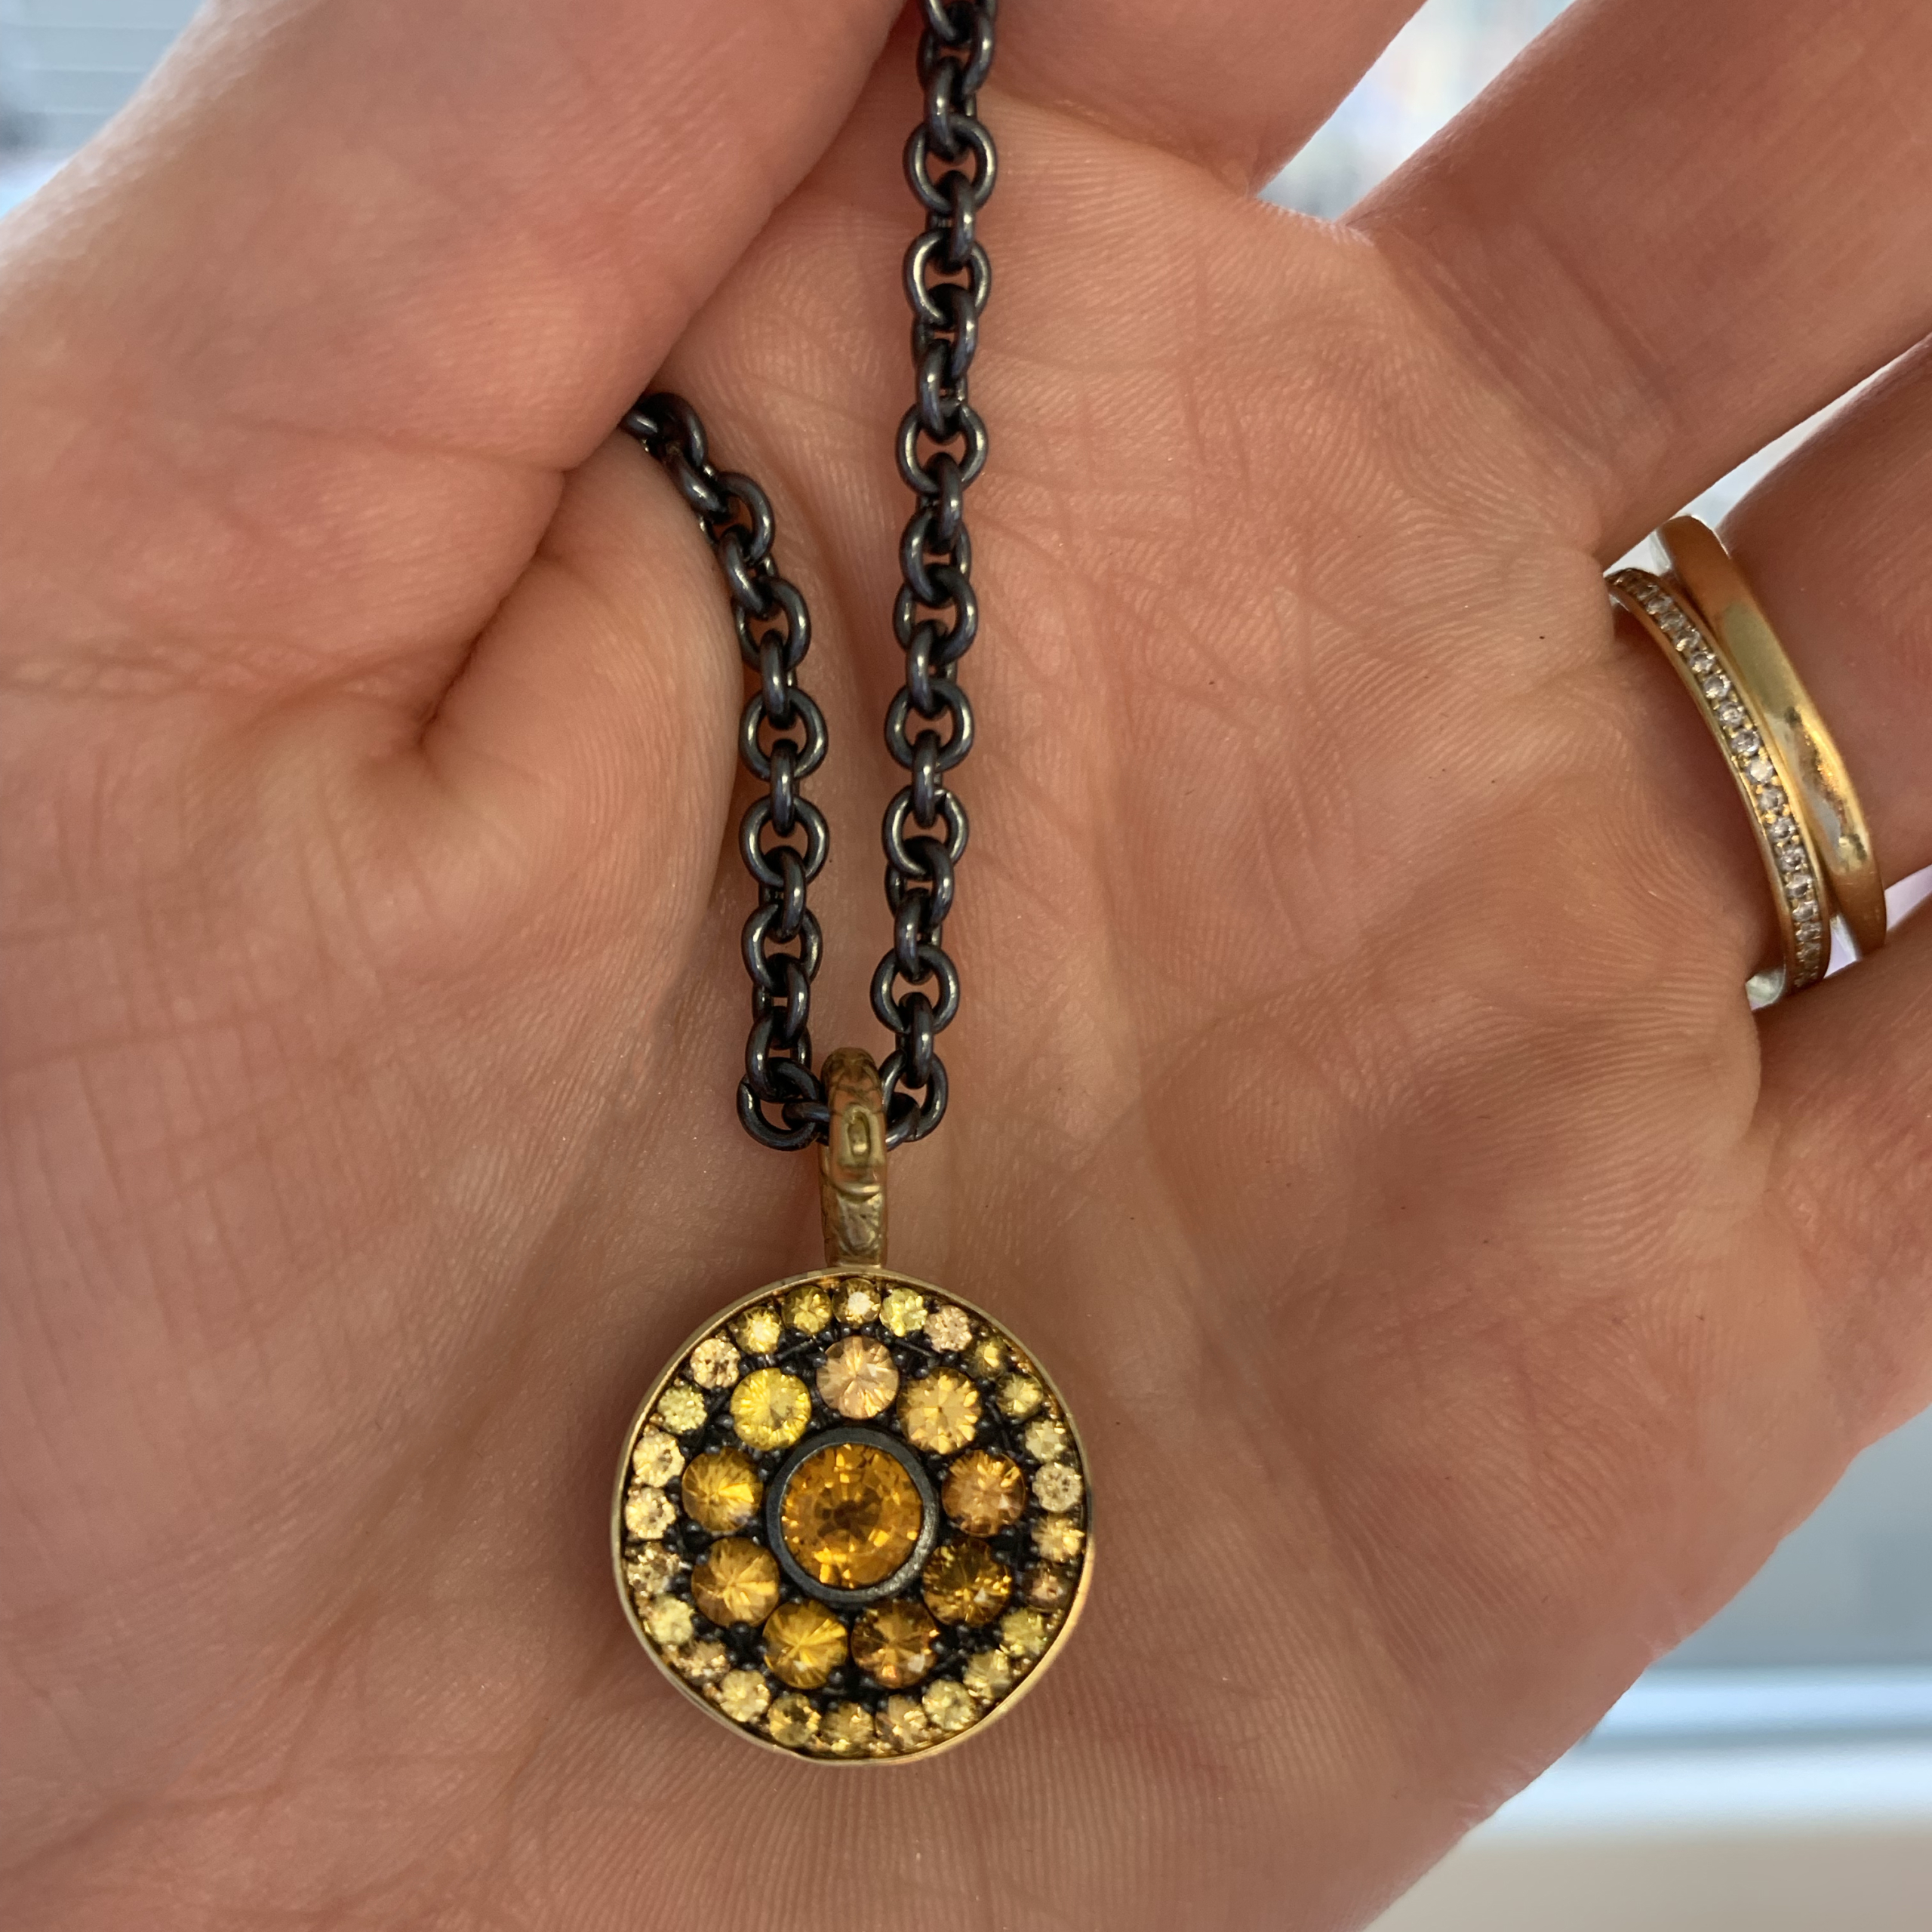 This is a photo of a pave yellow sapphire pendant on an oxidized silver chain